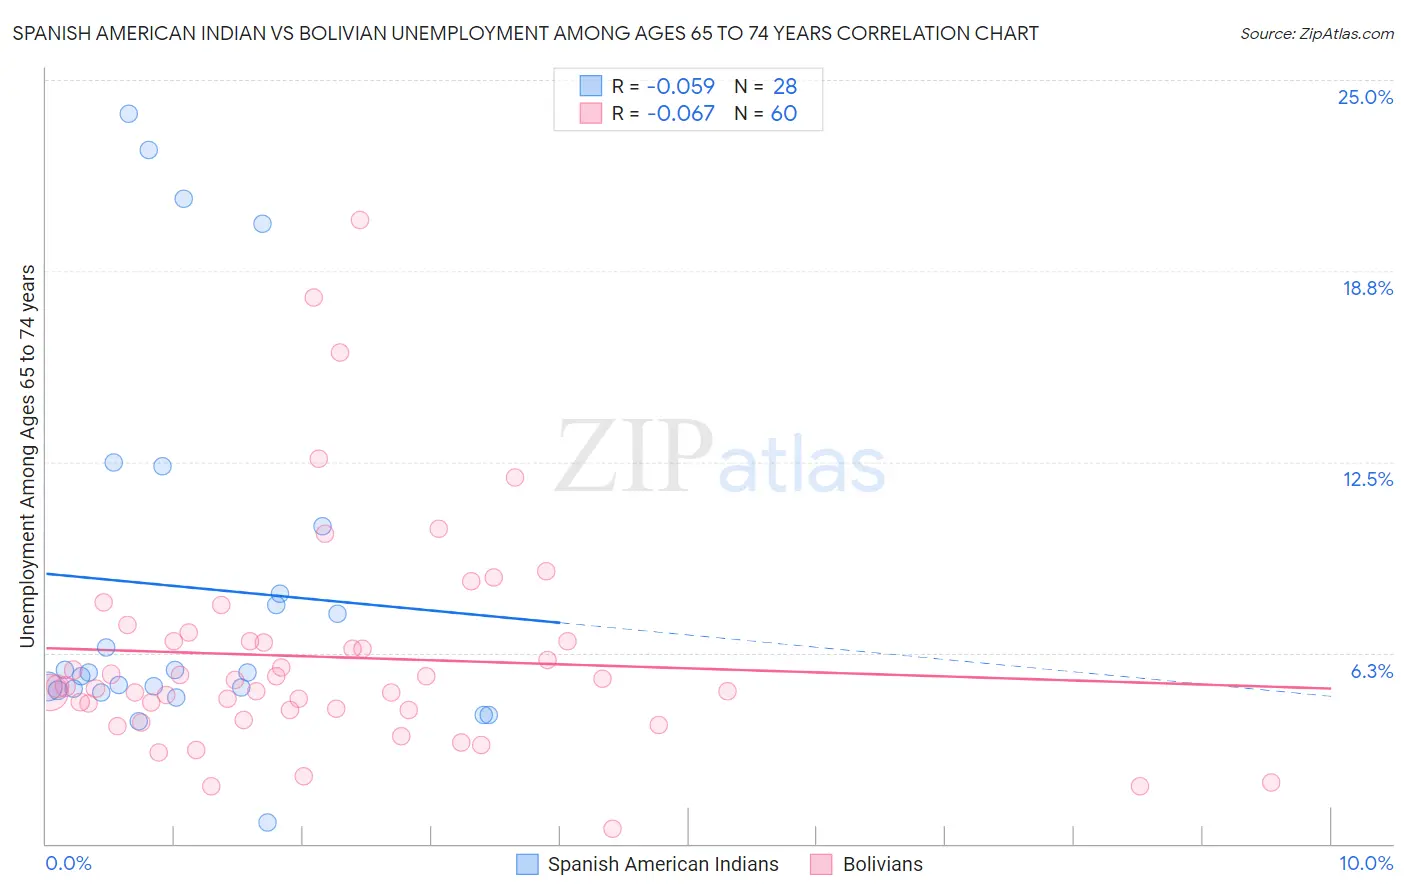 Spanish American Indian vs Bolivian Unemployment Among Ages 65 to 74 years